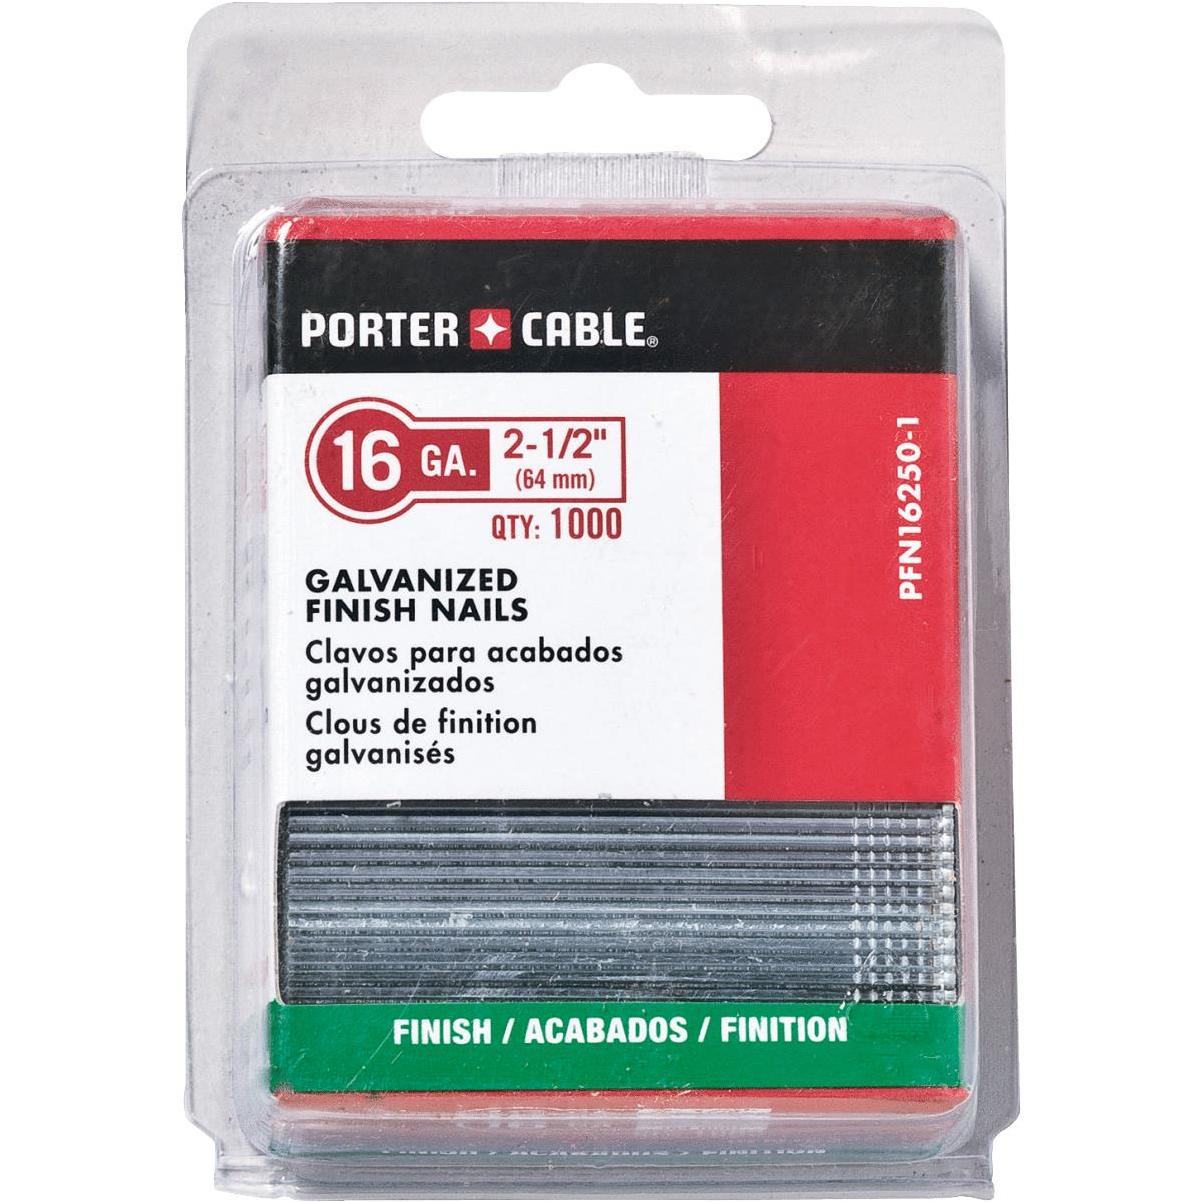 Porter Cable 16-Gauge Galvanized Straight Finish Nail, 2-1/2 In. (2500 Ct.)  Elitsac, Inc.